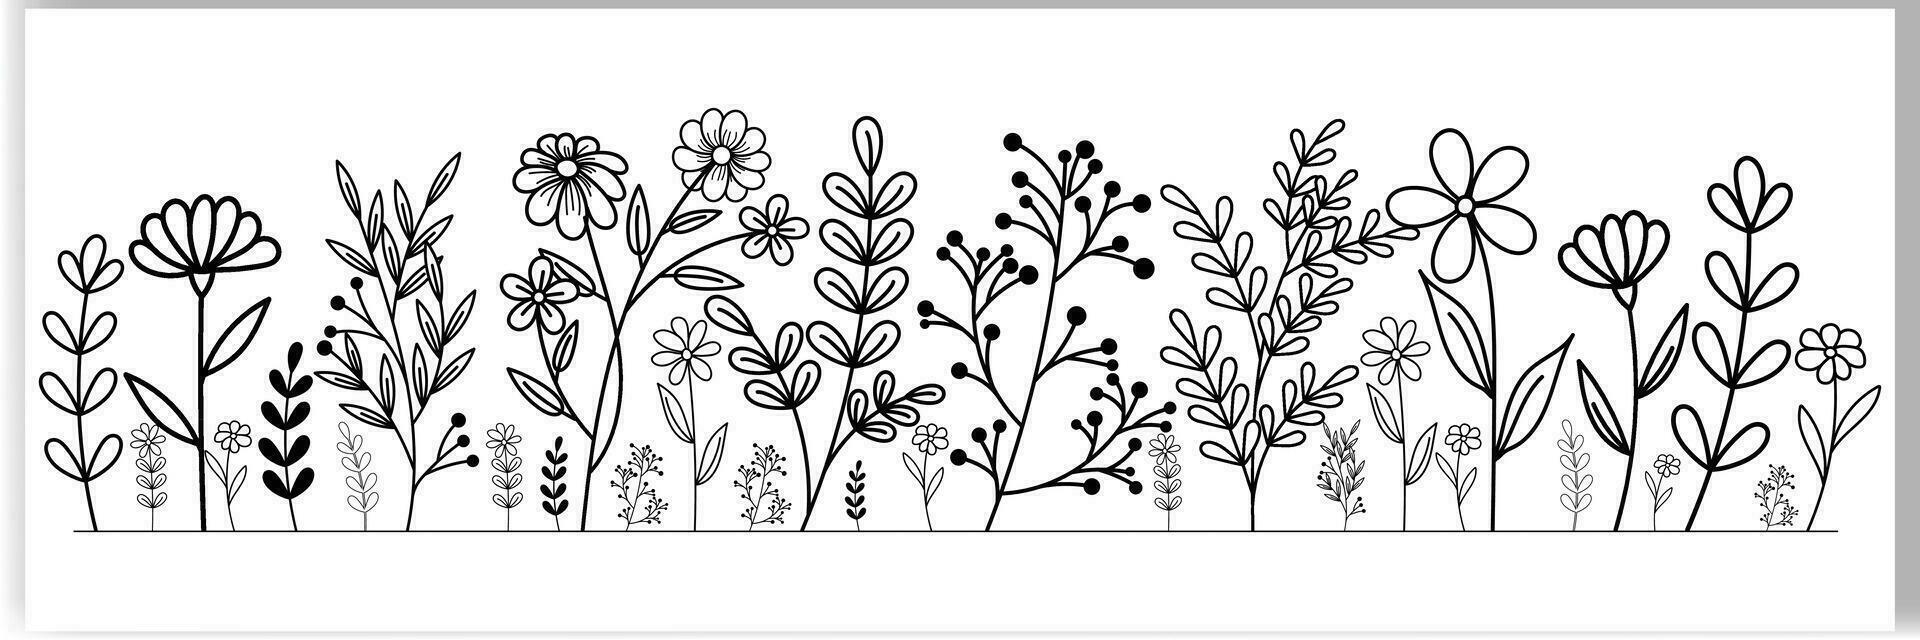 Botanical abstract line art composition minimal floral border of hand-drawn herbs flowers leaves vector